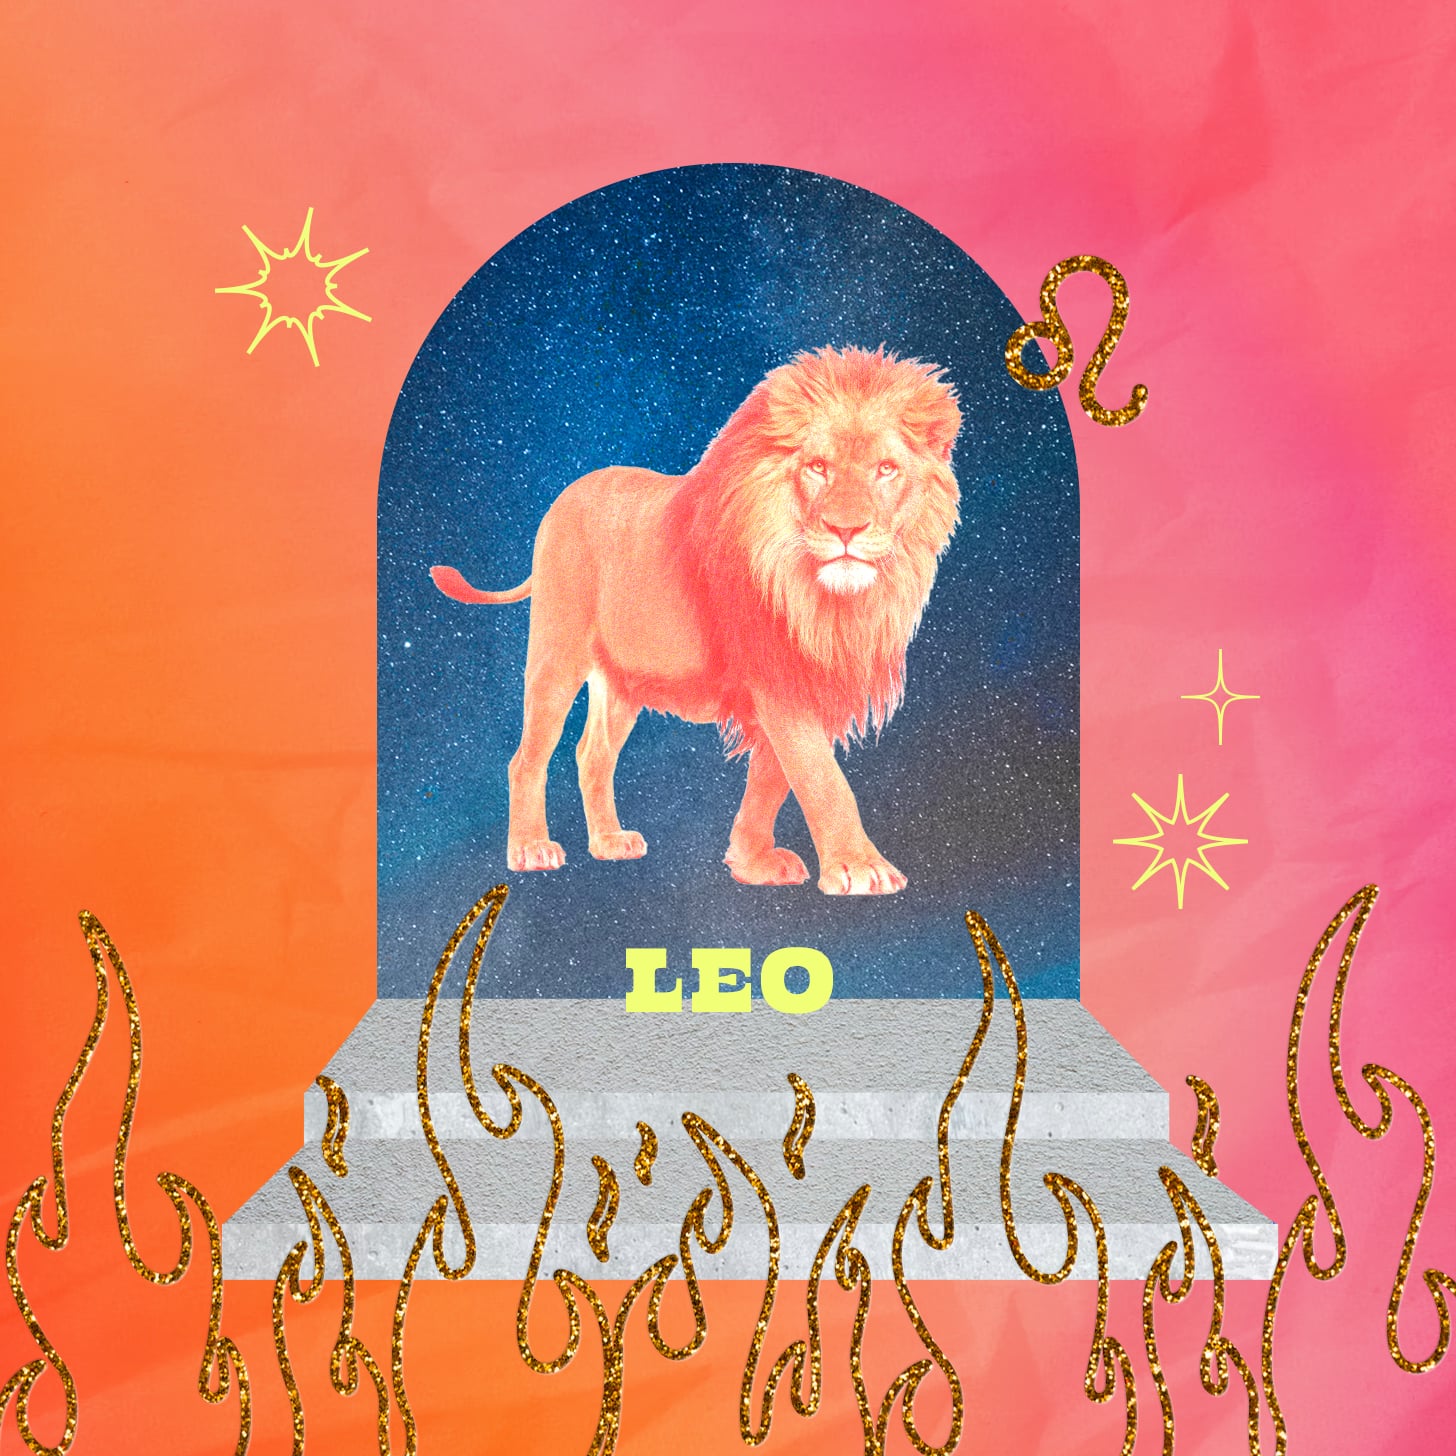 Leo weekly horoscope for august 14, 2022